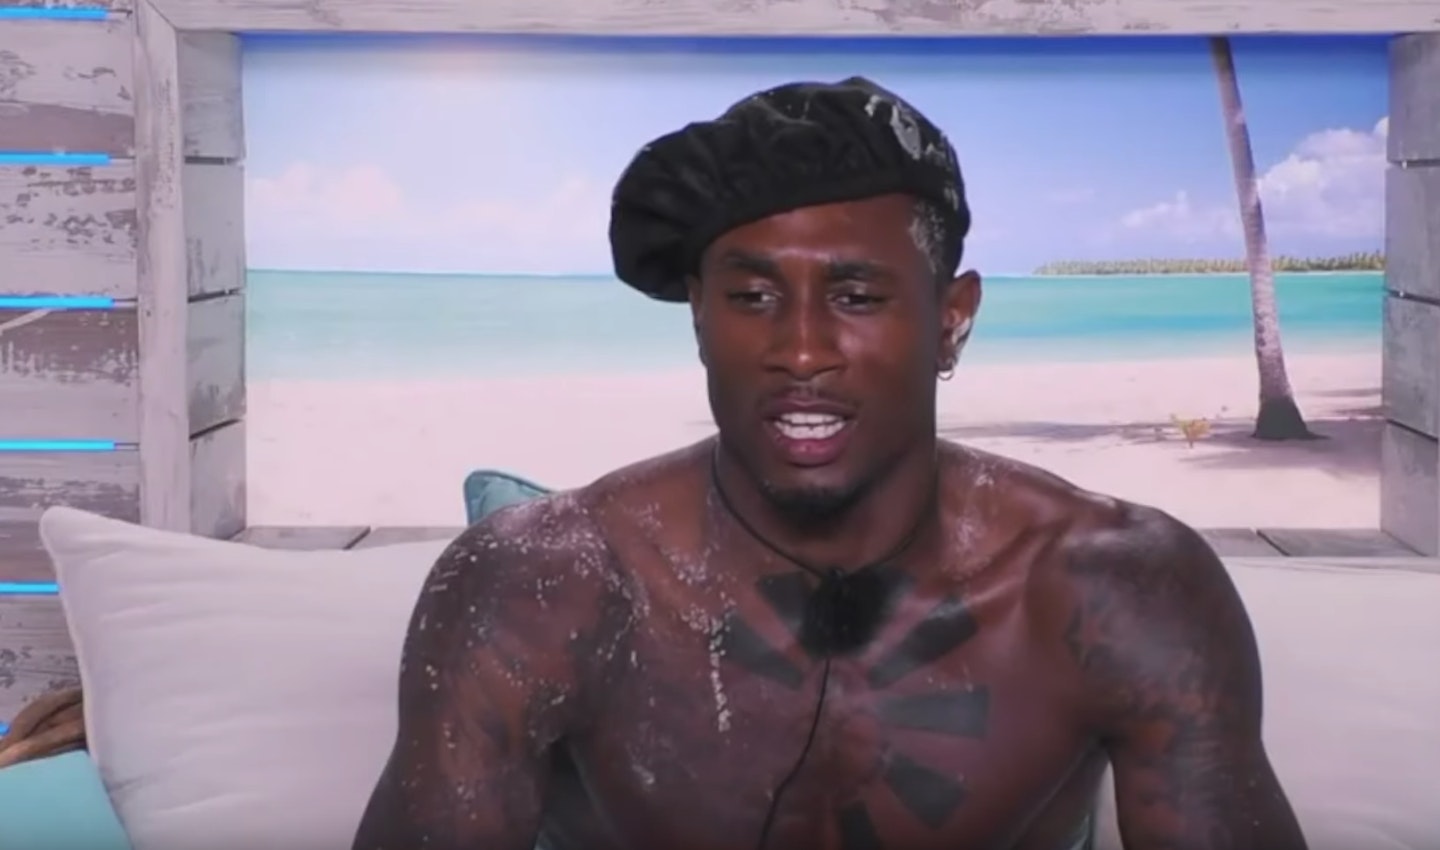 ovie from love island wearing a beret